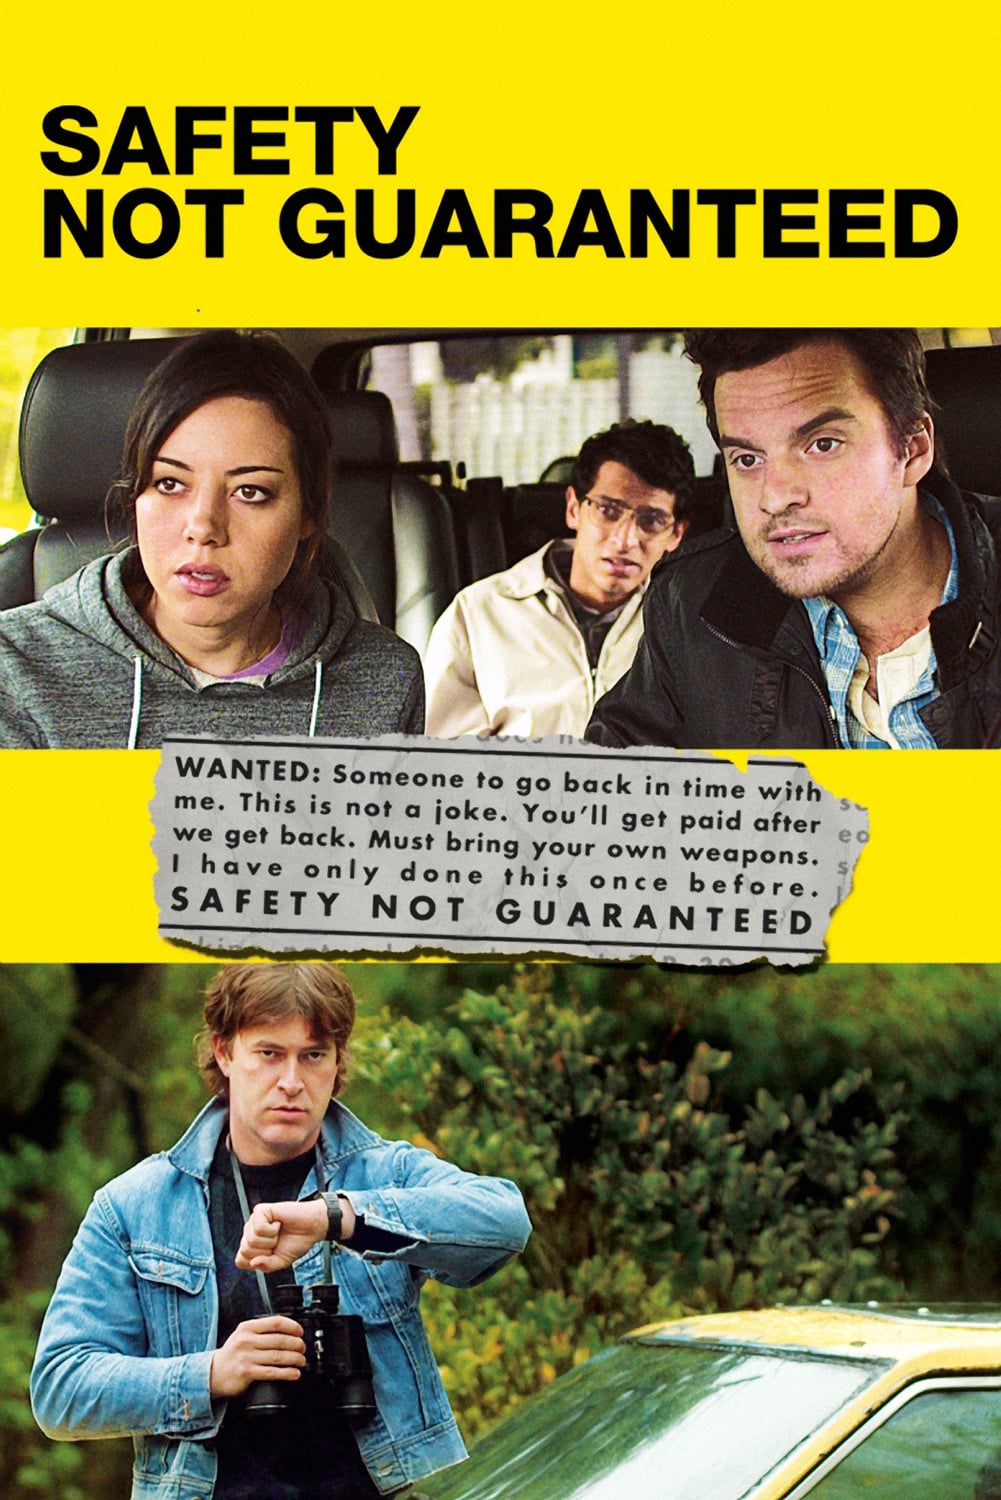 Affiche du film "Safety Not Guaranteed"